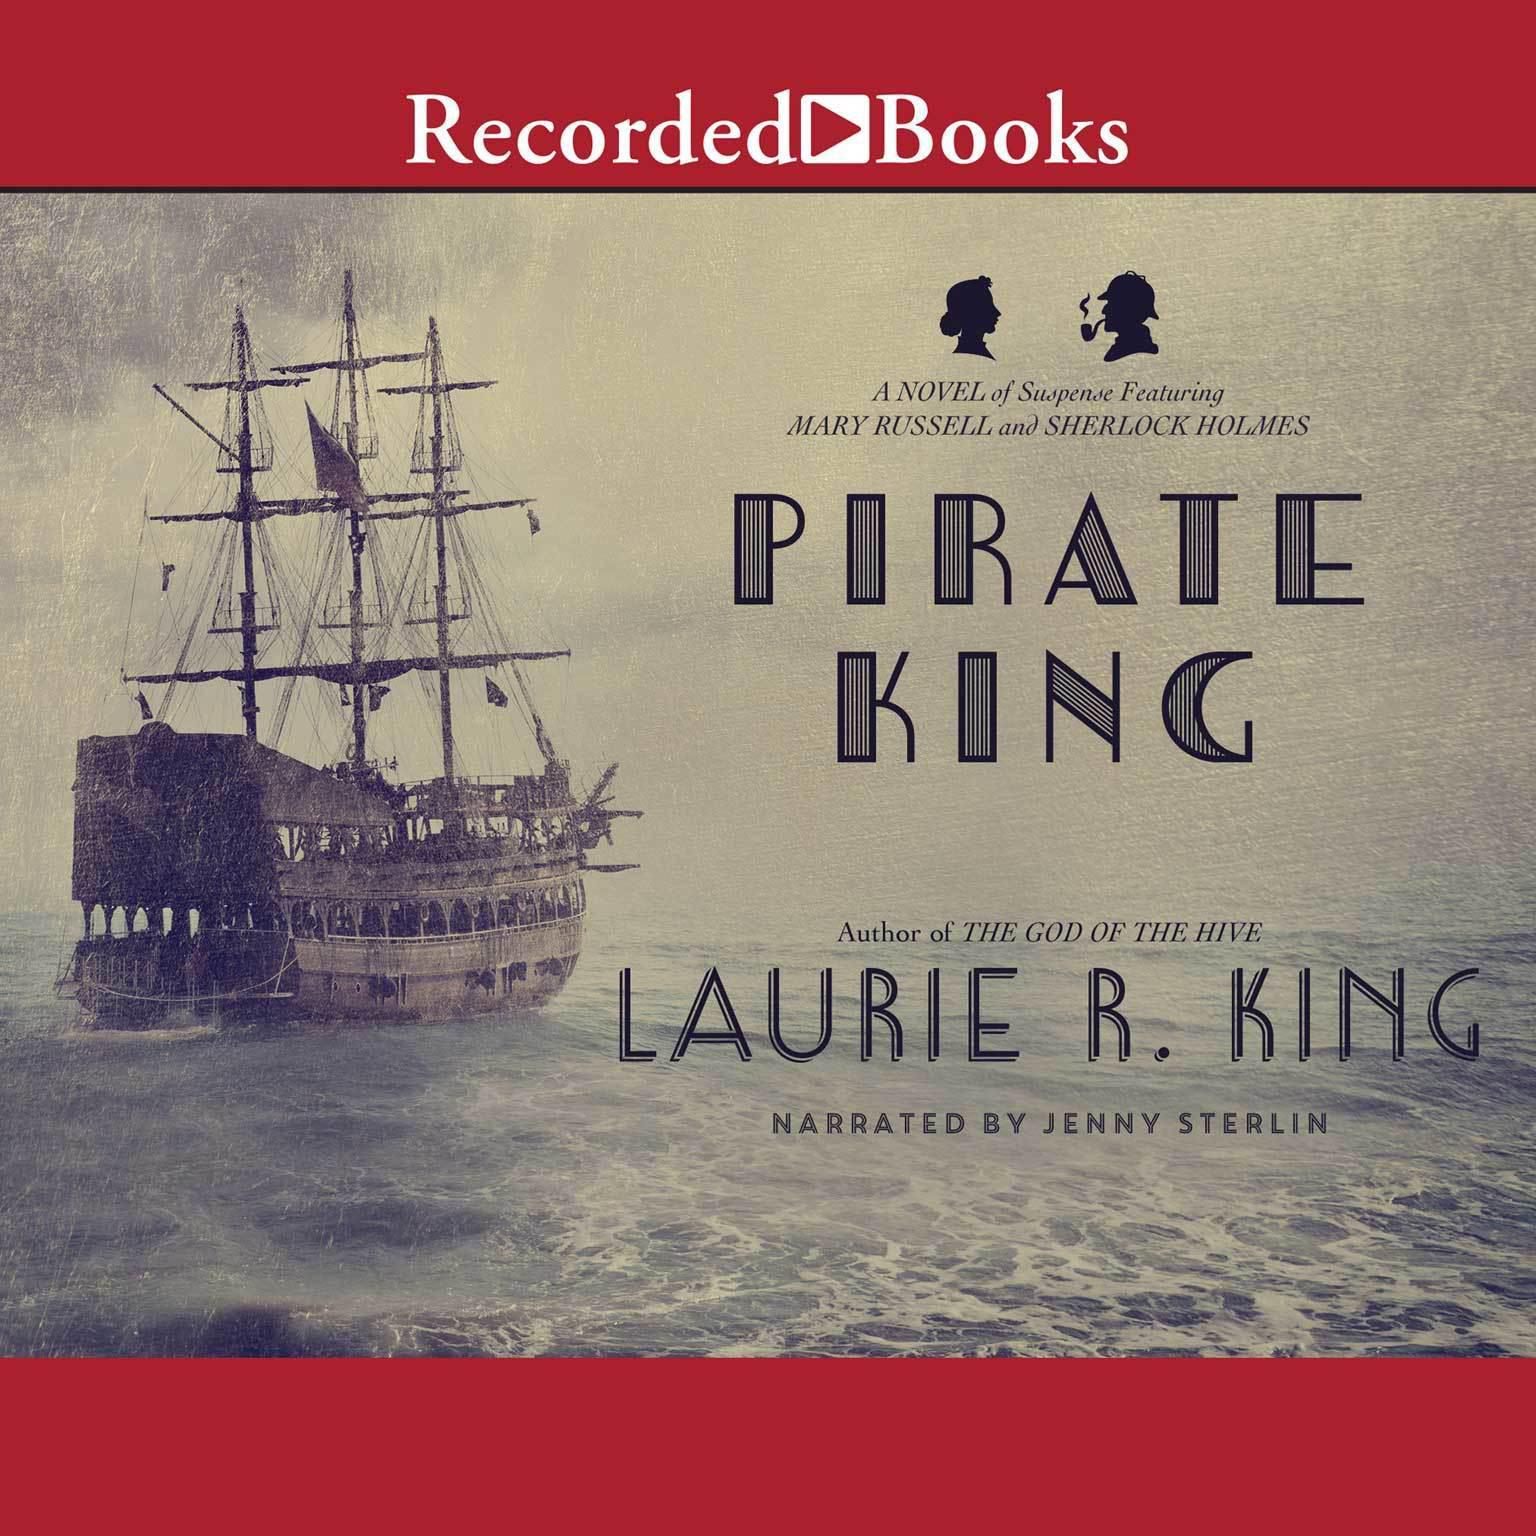 Pirate King: A Novel of Suspense Featuring Mary Russell and Sherlock Holmes Audiobook, by Laurie R. King